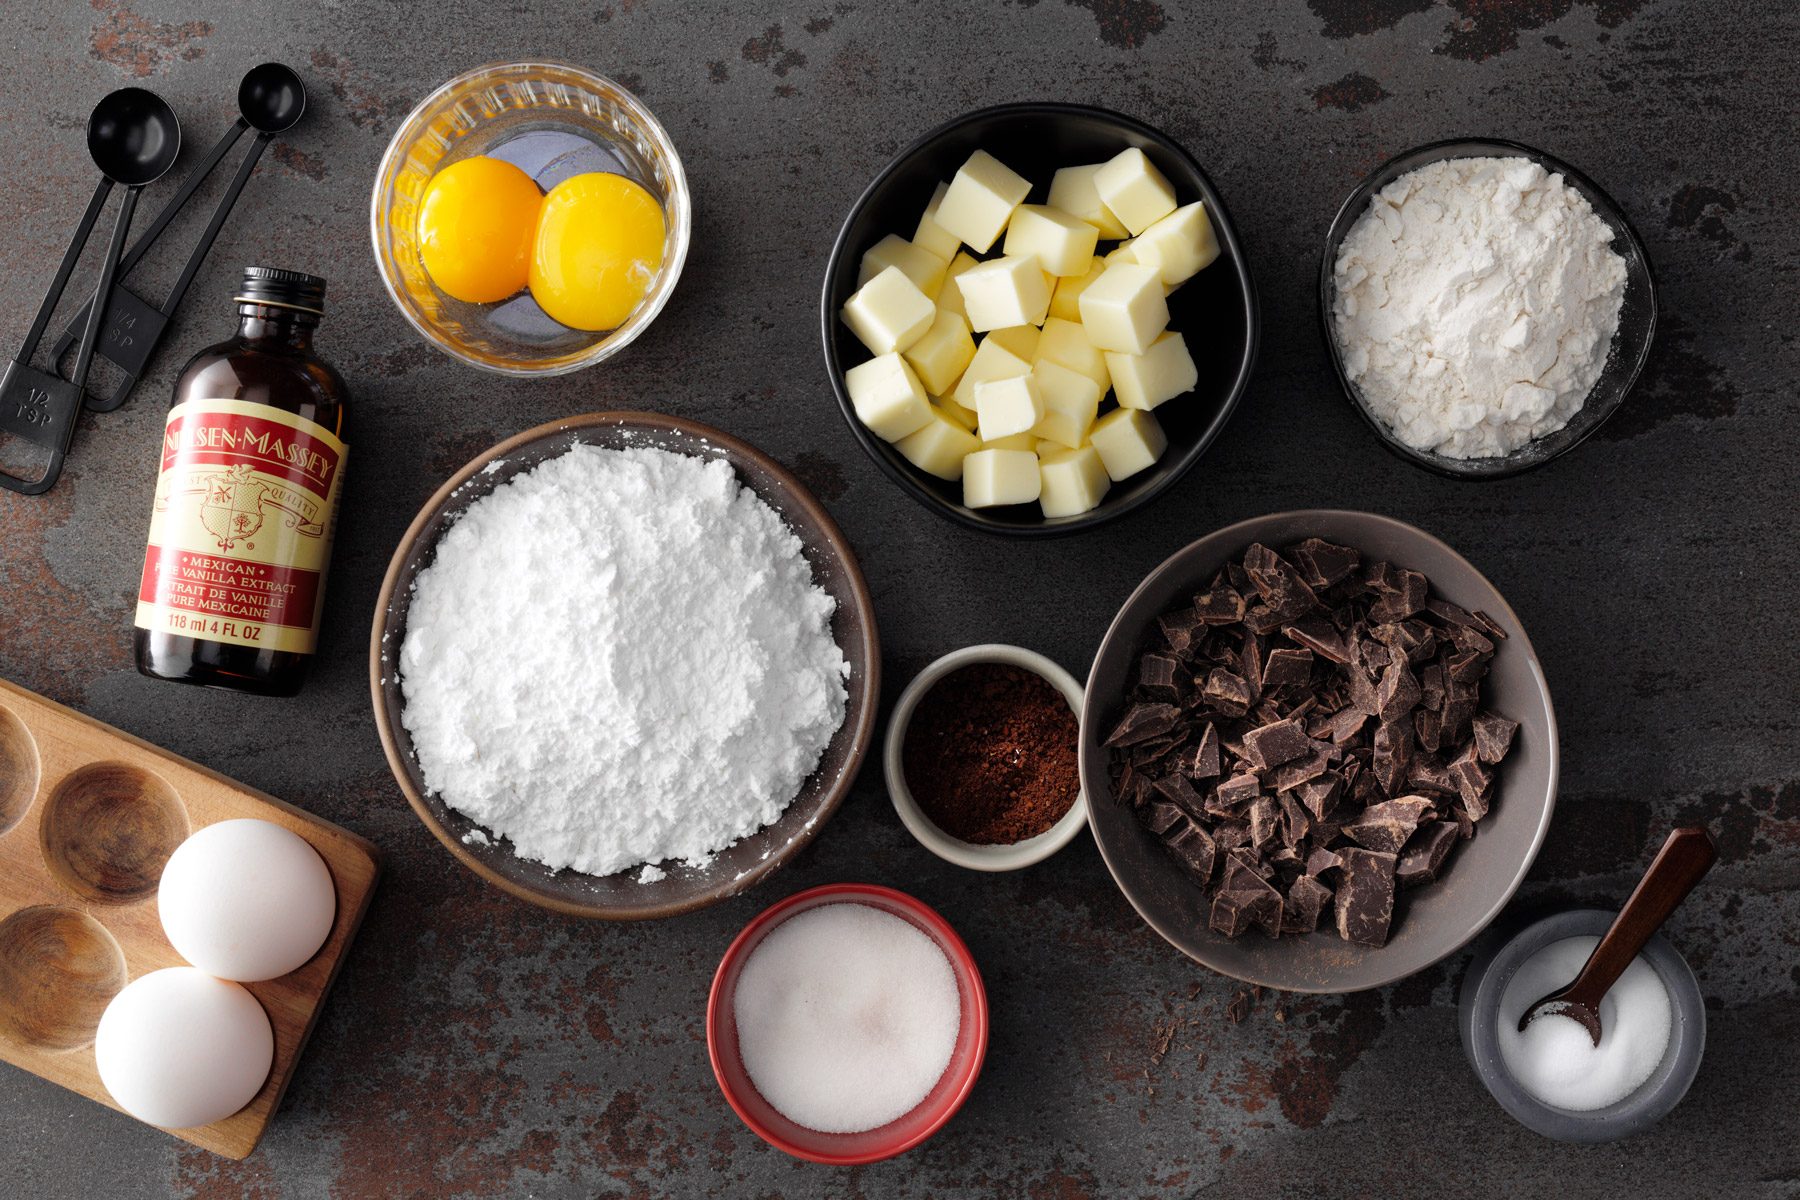 An ingredients for a chocolate lava cake, including flour, cocoa powder, eggs, sugar, and butter.